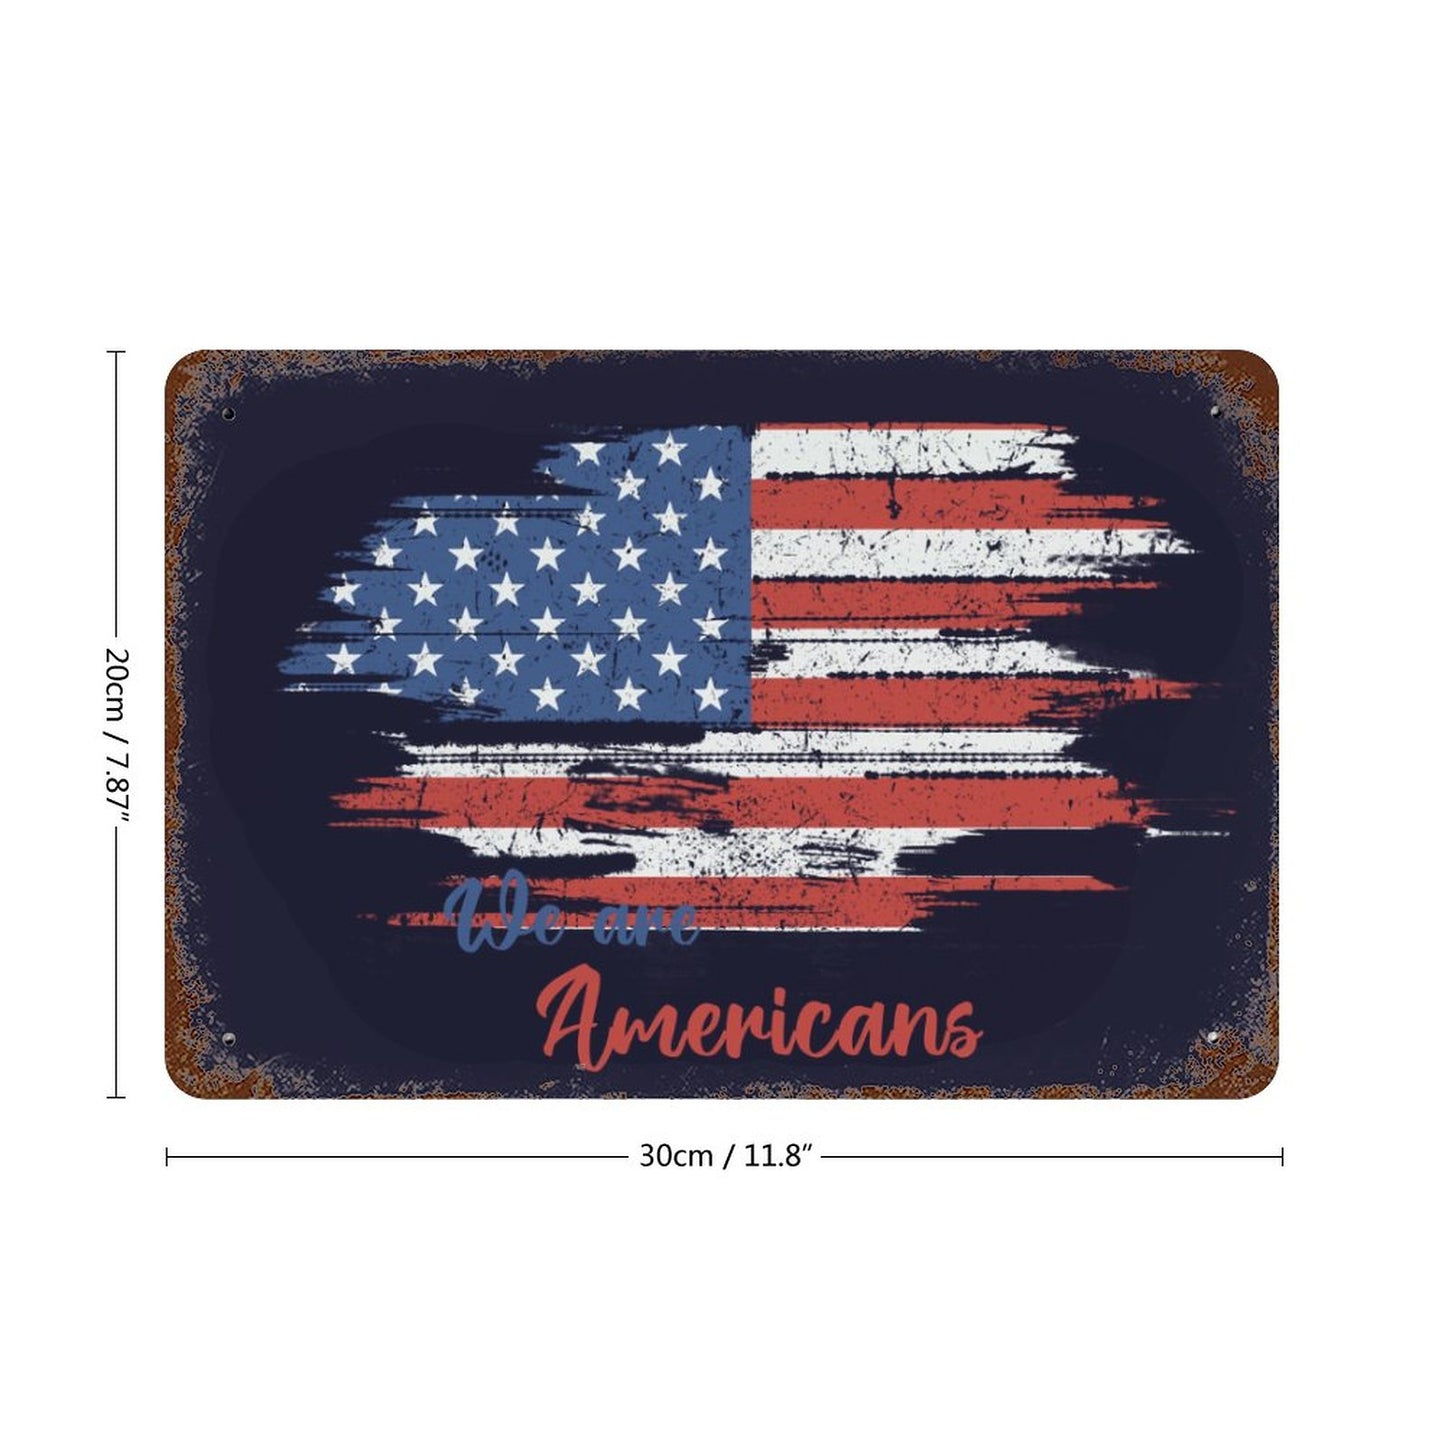 Online DIY Vintage Iron Hanging Plate With Rust Horizontal American Flag